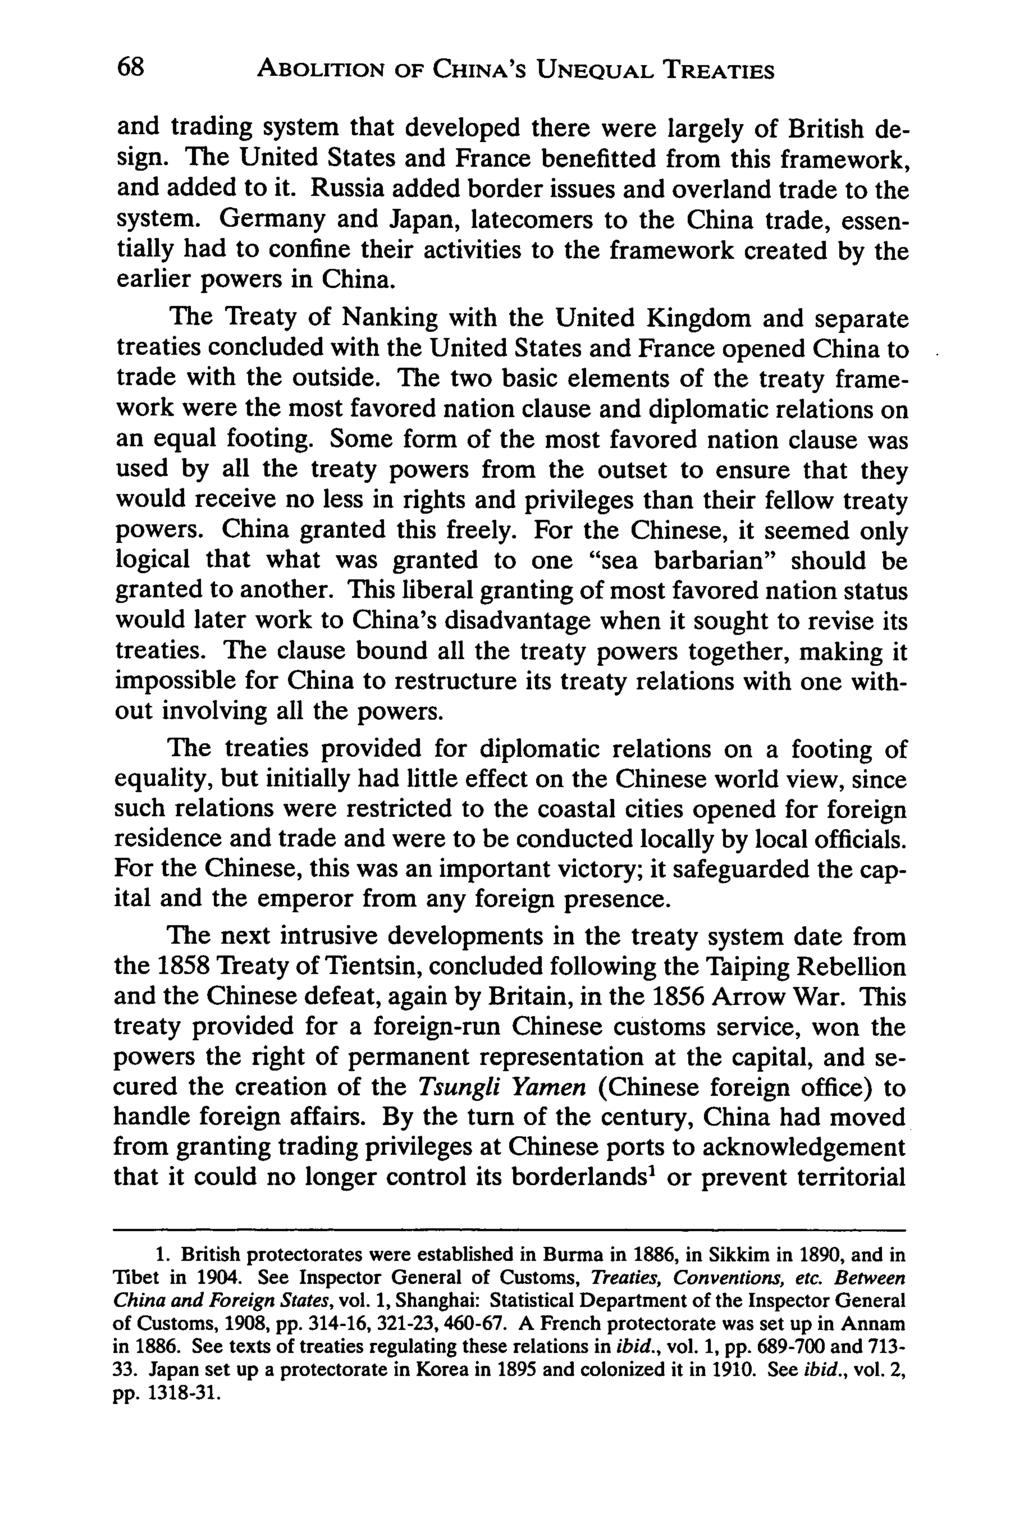 ABOLITION OF CHINA'S UNEQUAL TREATIES and trading system that developed there were largely of British design. The United States and France benefitted from this framework, and added to it.